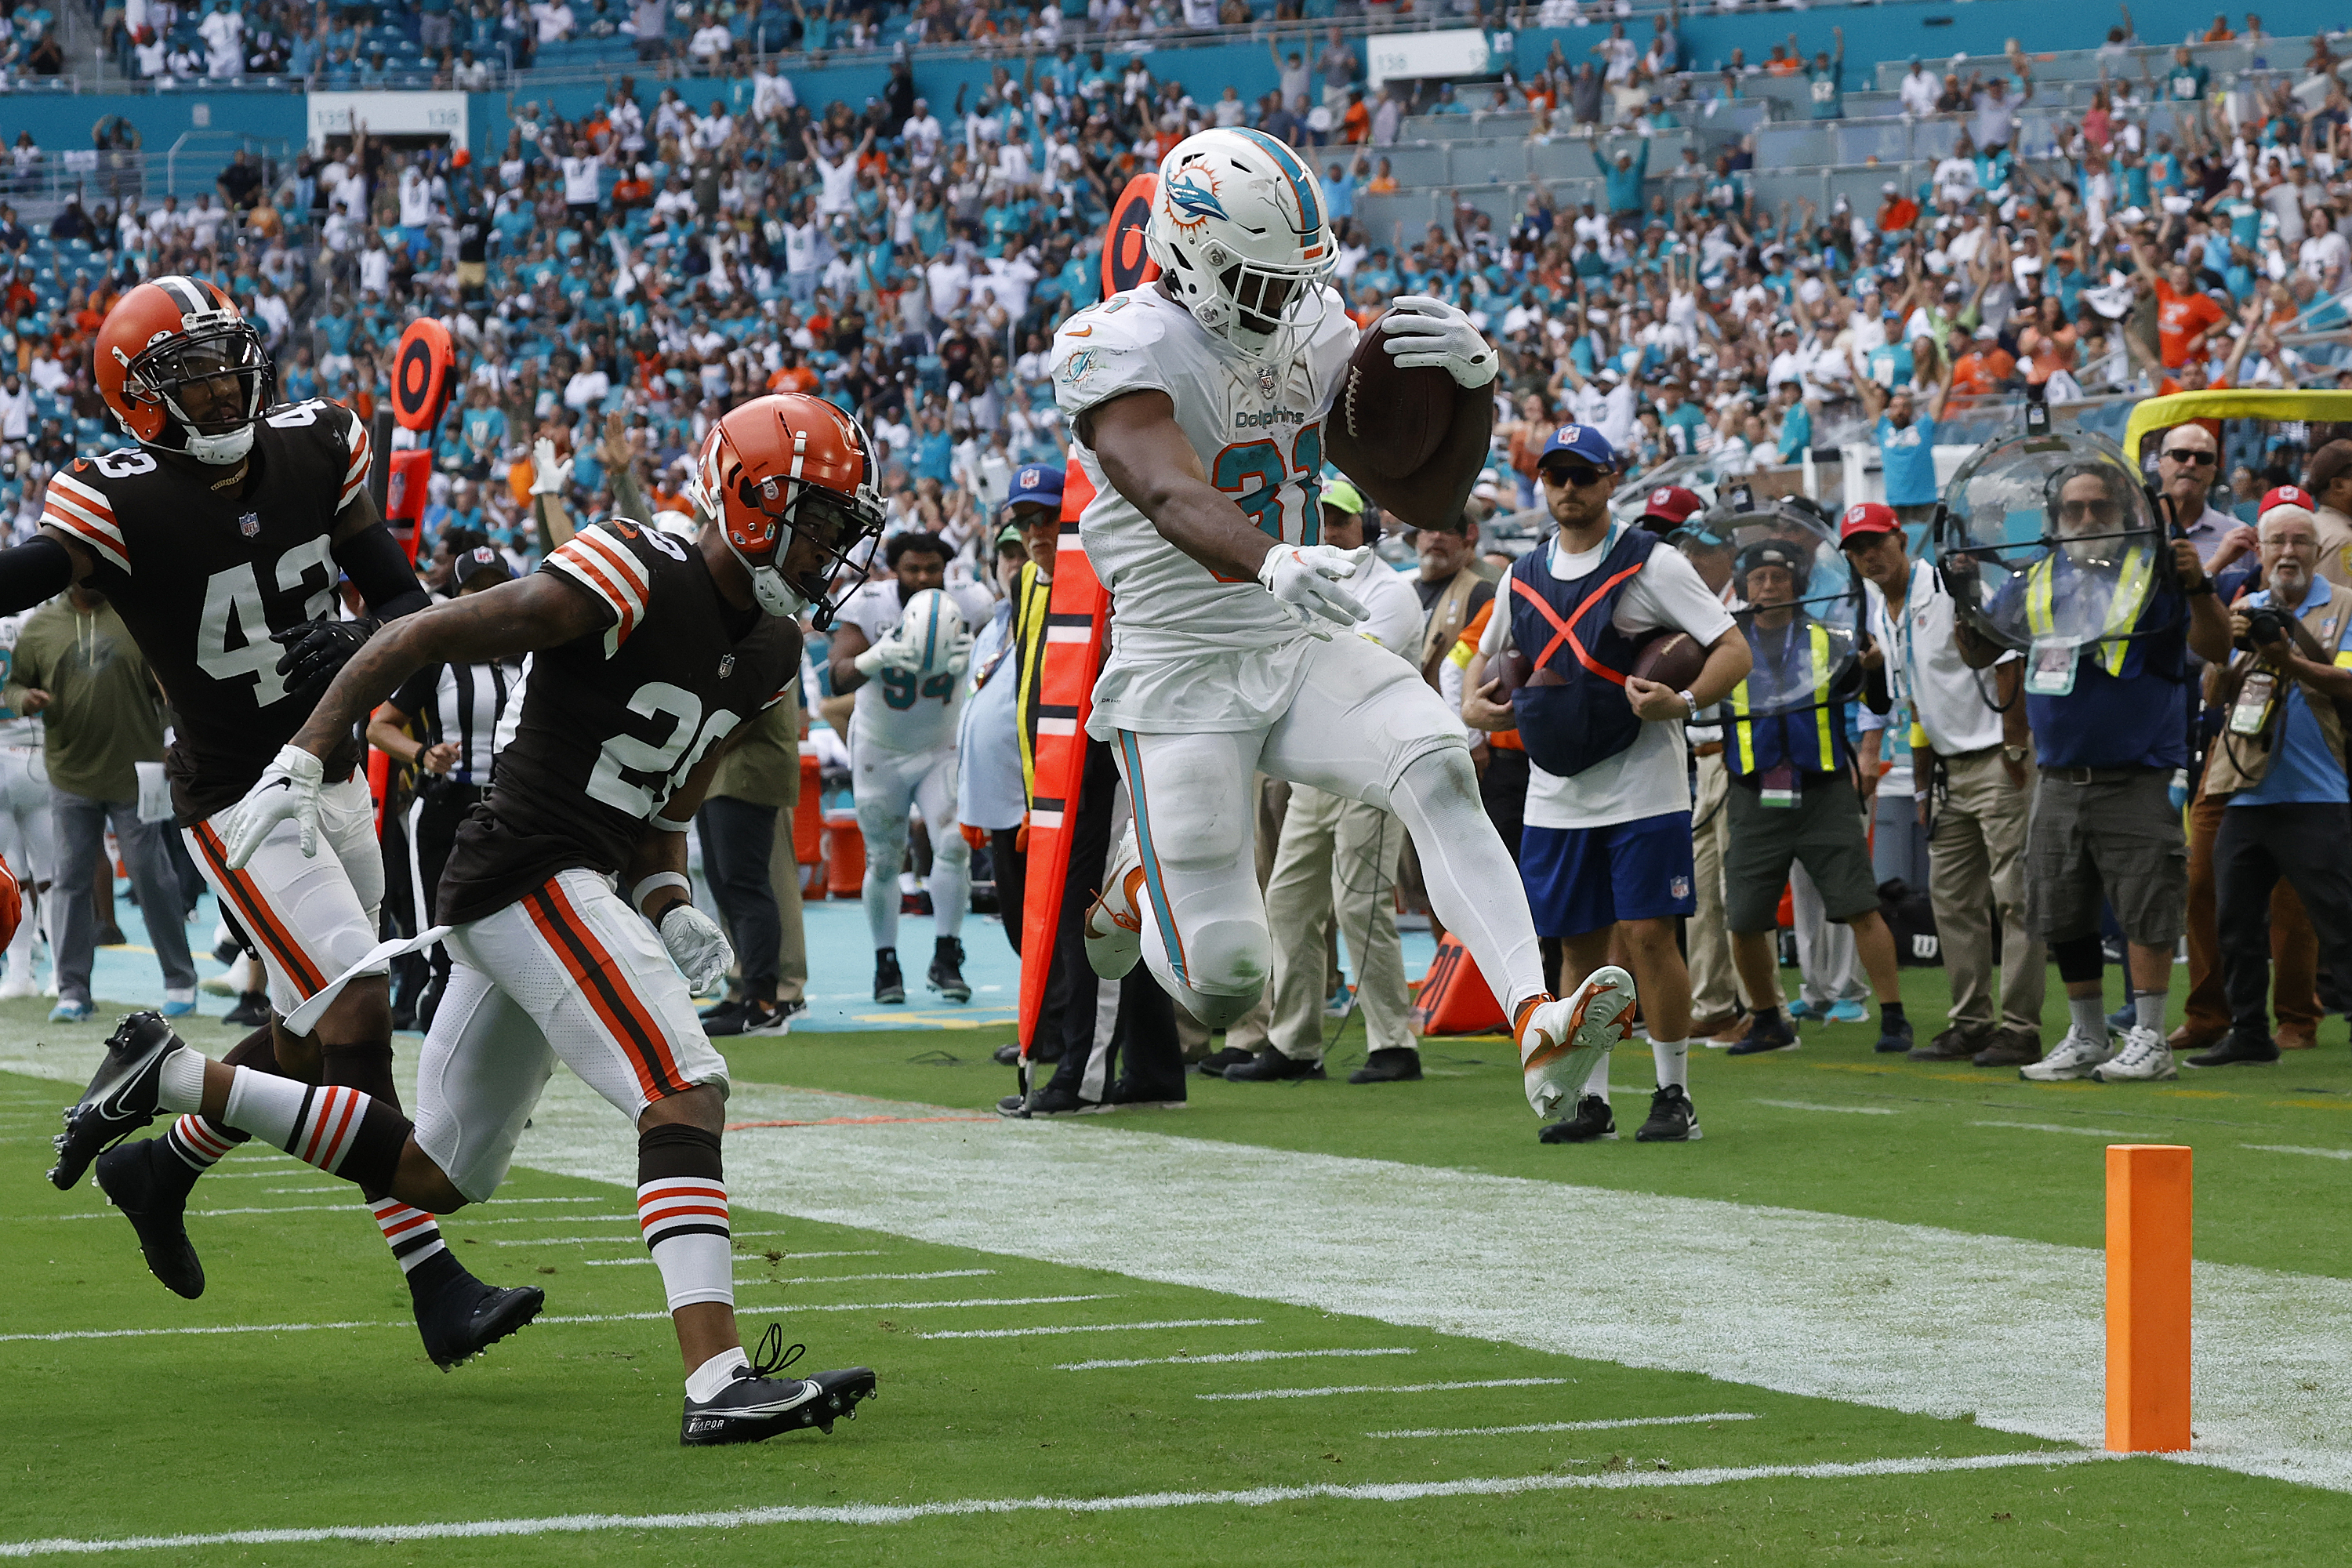 Raheem Mostert #31 of the Miami Dolphins runs 24 yards for a third quarter touchdown against the Cleveland Browns at Hard Rock Stadium on November 13, 2022 in Miami Gardens, Florida.